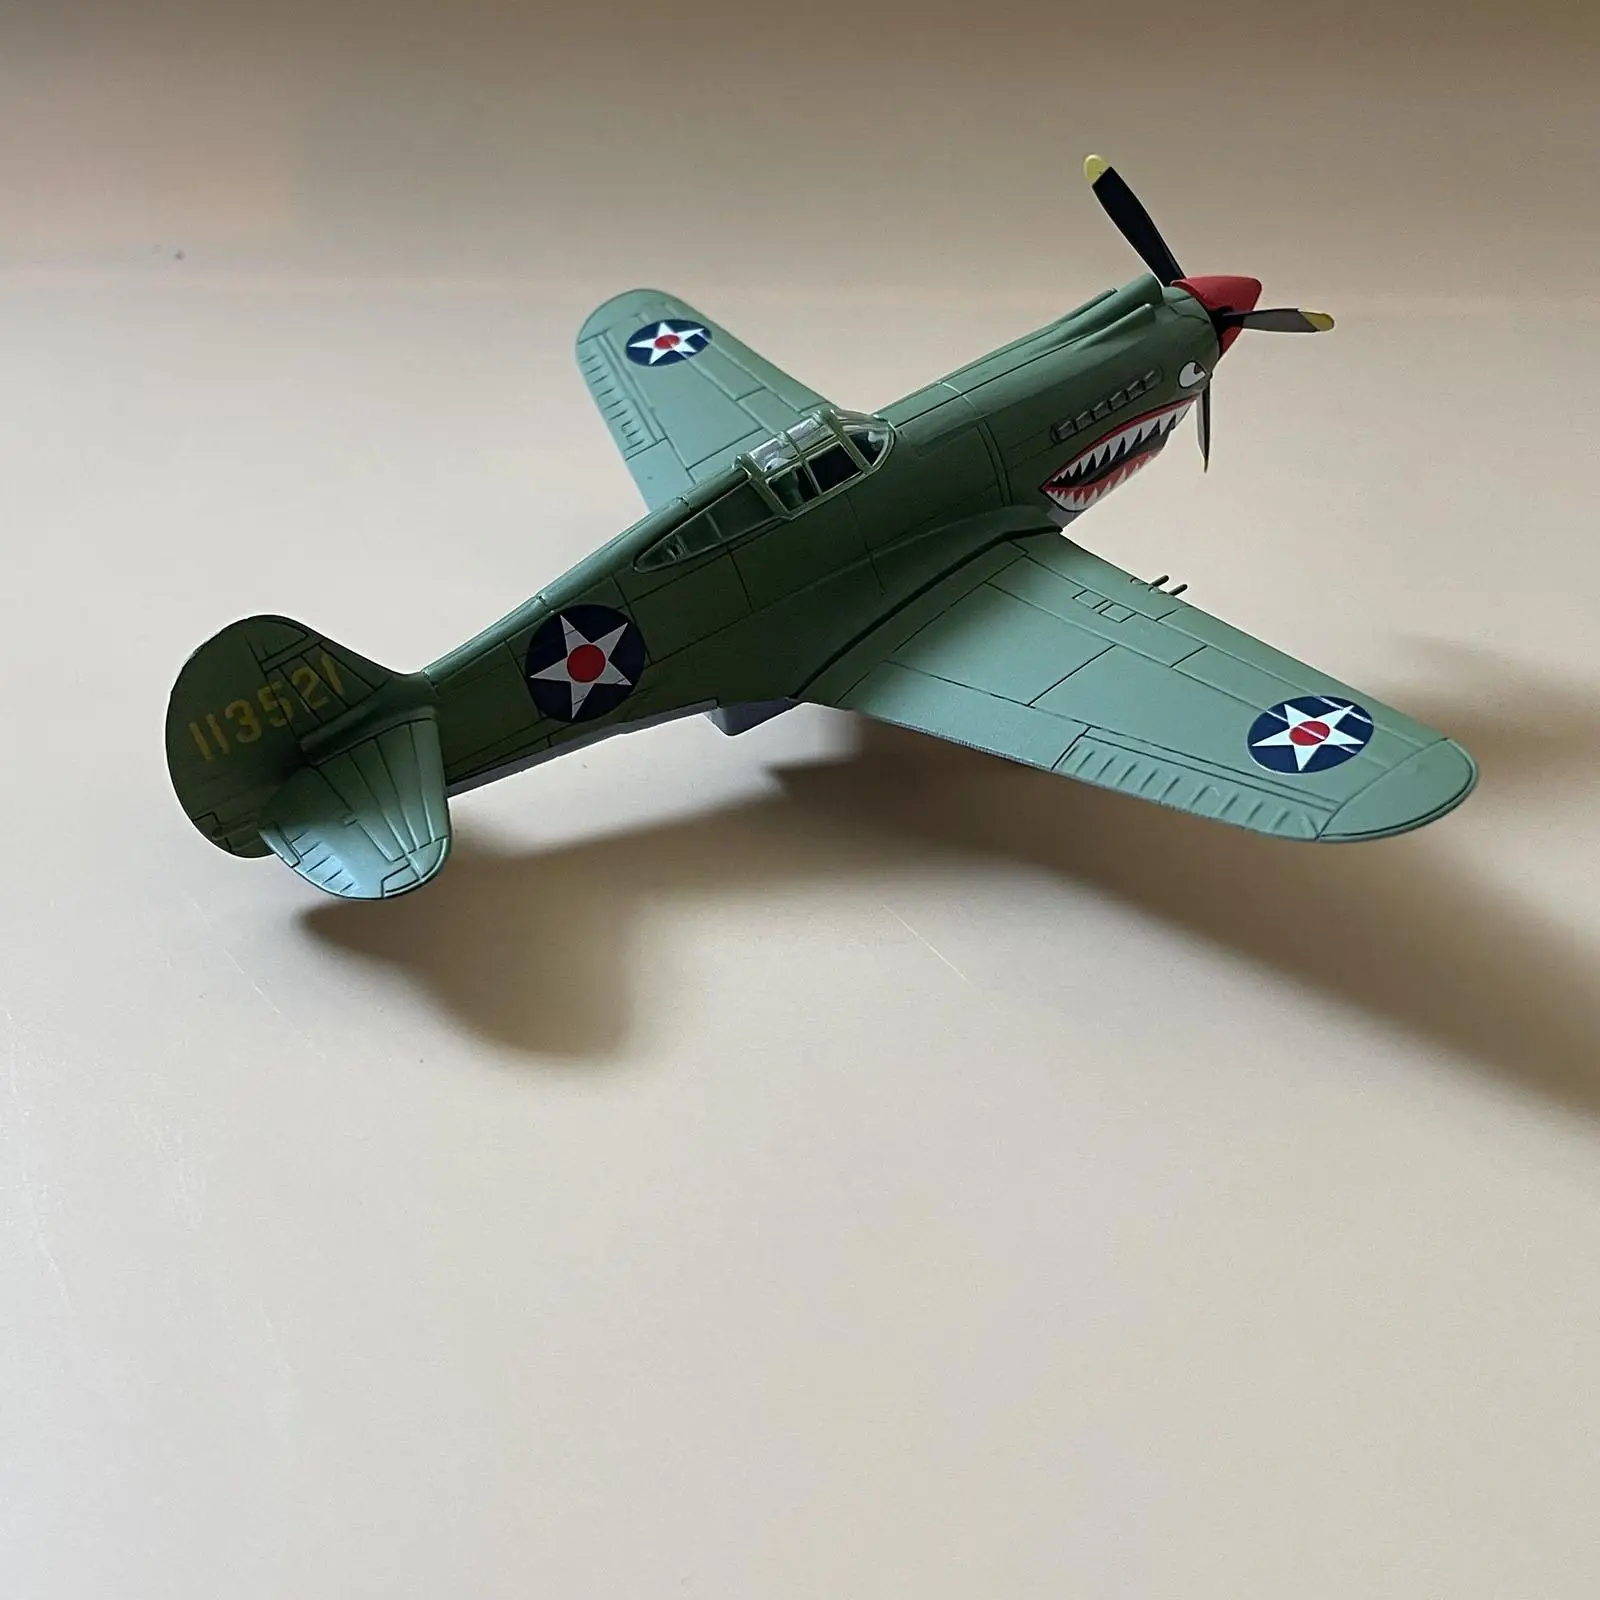 

1/72 Scale Plane Decorative Military Display Durable Metal Gifts Static Aviation Airplane for Adult Kids Beginners